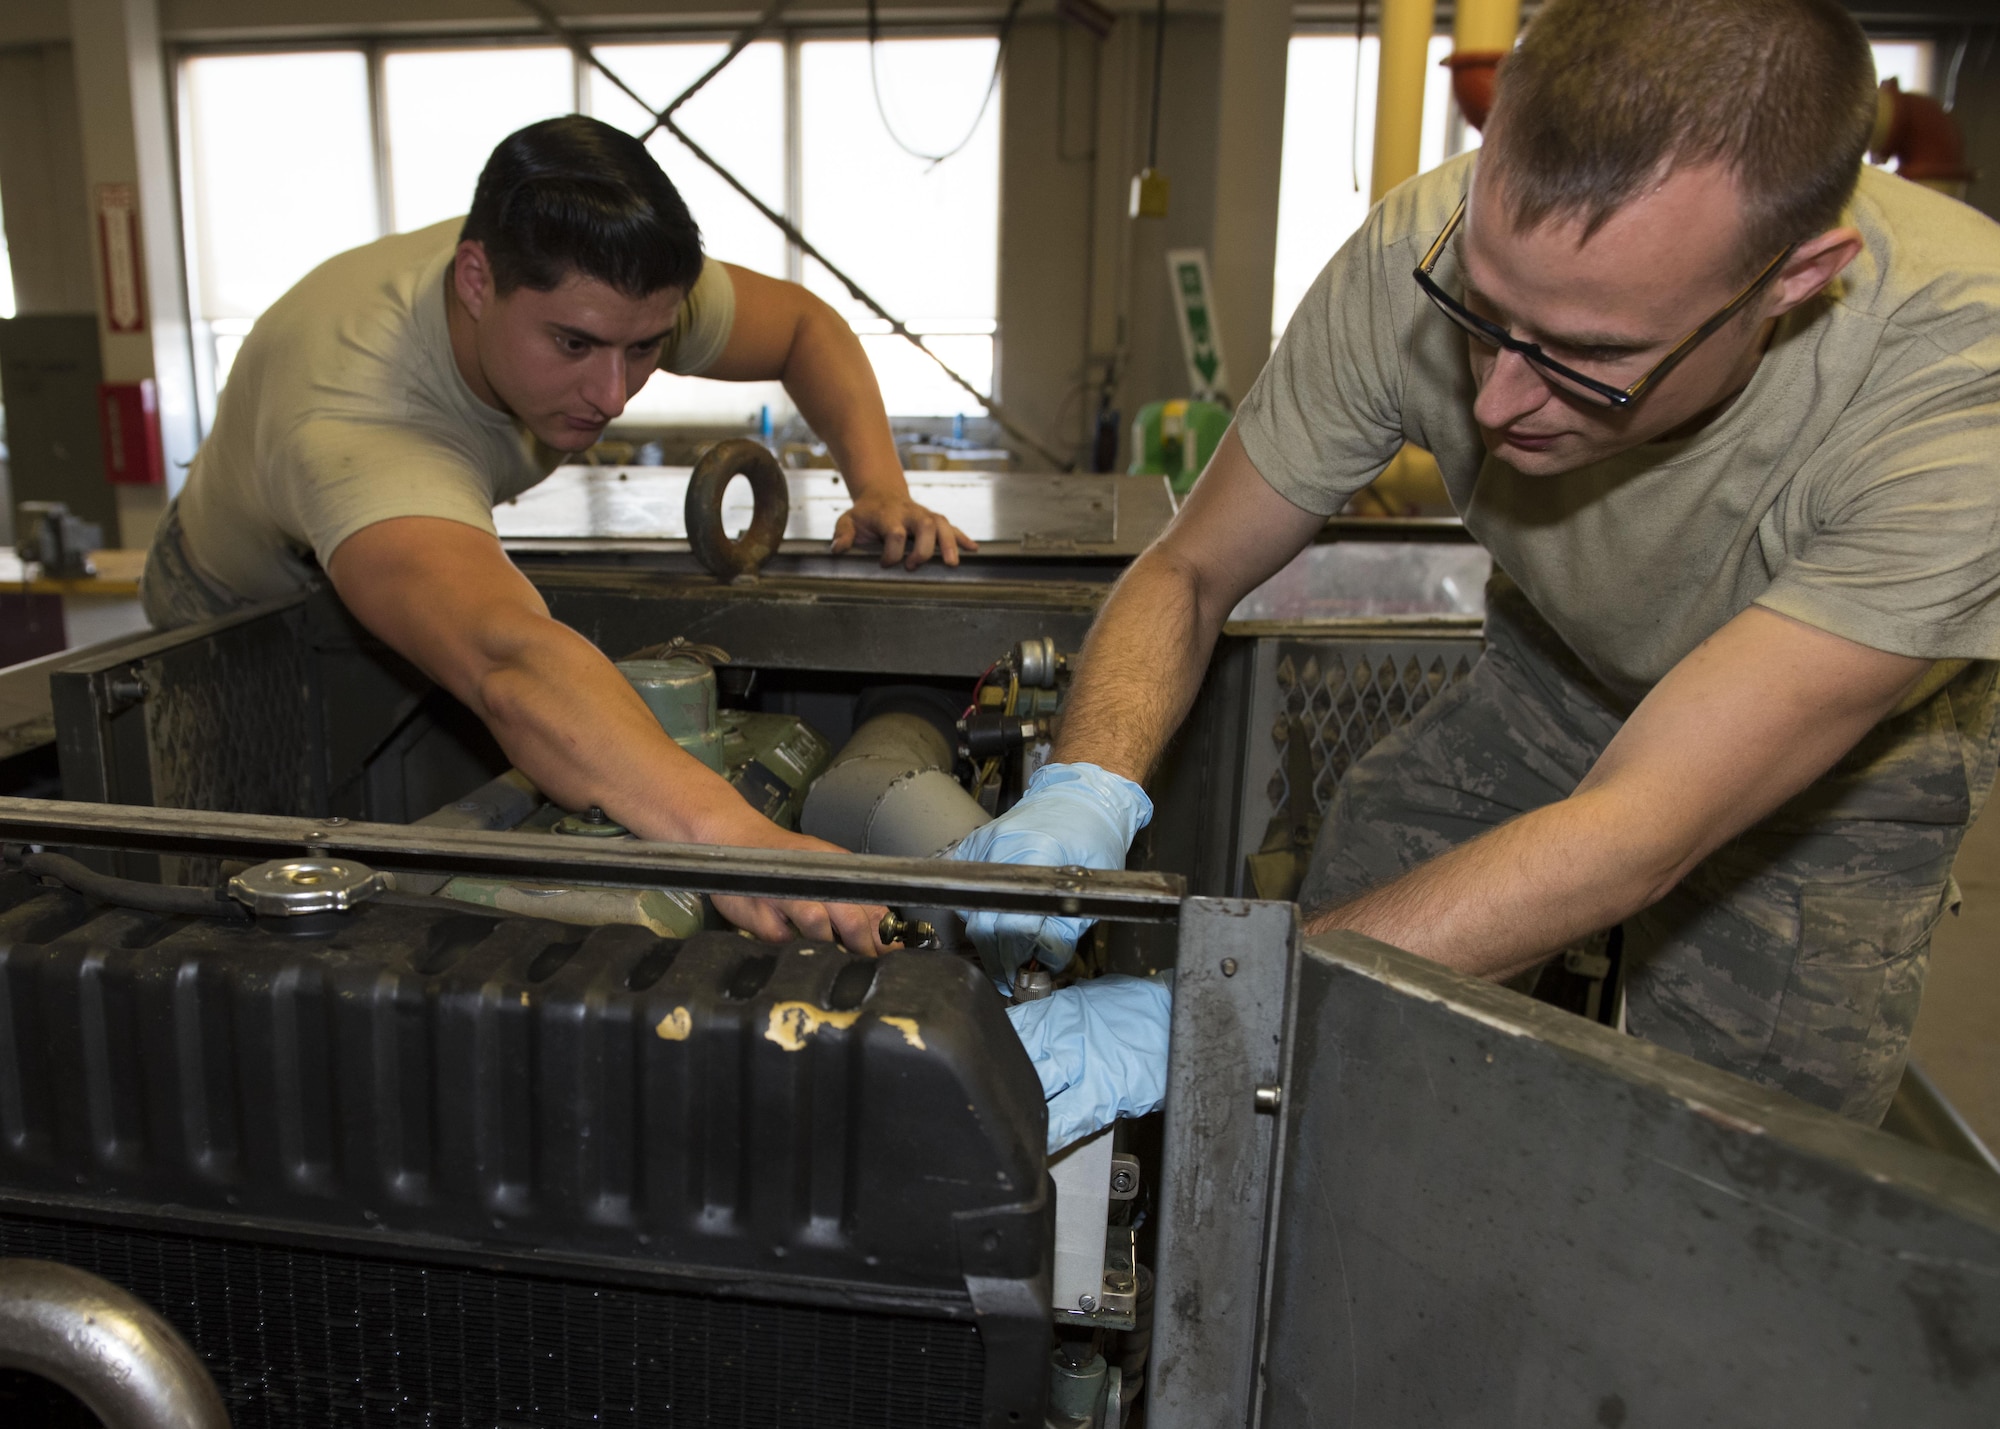 Senior Airman Austin Ready, 92nd Aerospace Ground Equipment journeyman and Staff Sgt. Brandon Baltis, 92nd AGE craftsman, test the connections and fittings on a power generator cart July 19, 2017, at Fairchild Air Force Base, Washington. Powerful mobile generators are necessary to provide aircraft with enough power to cold-start its engines. (U.S. Air Force photo / Airman 1st Class Ryan Lackey)